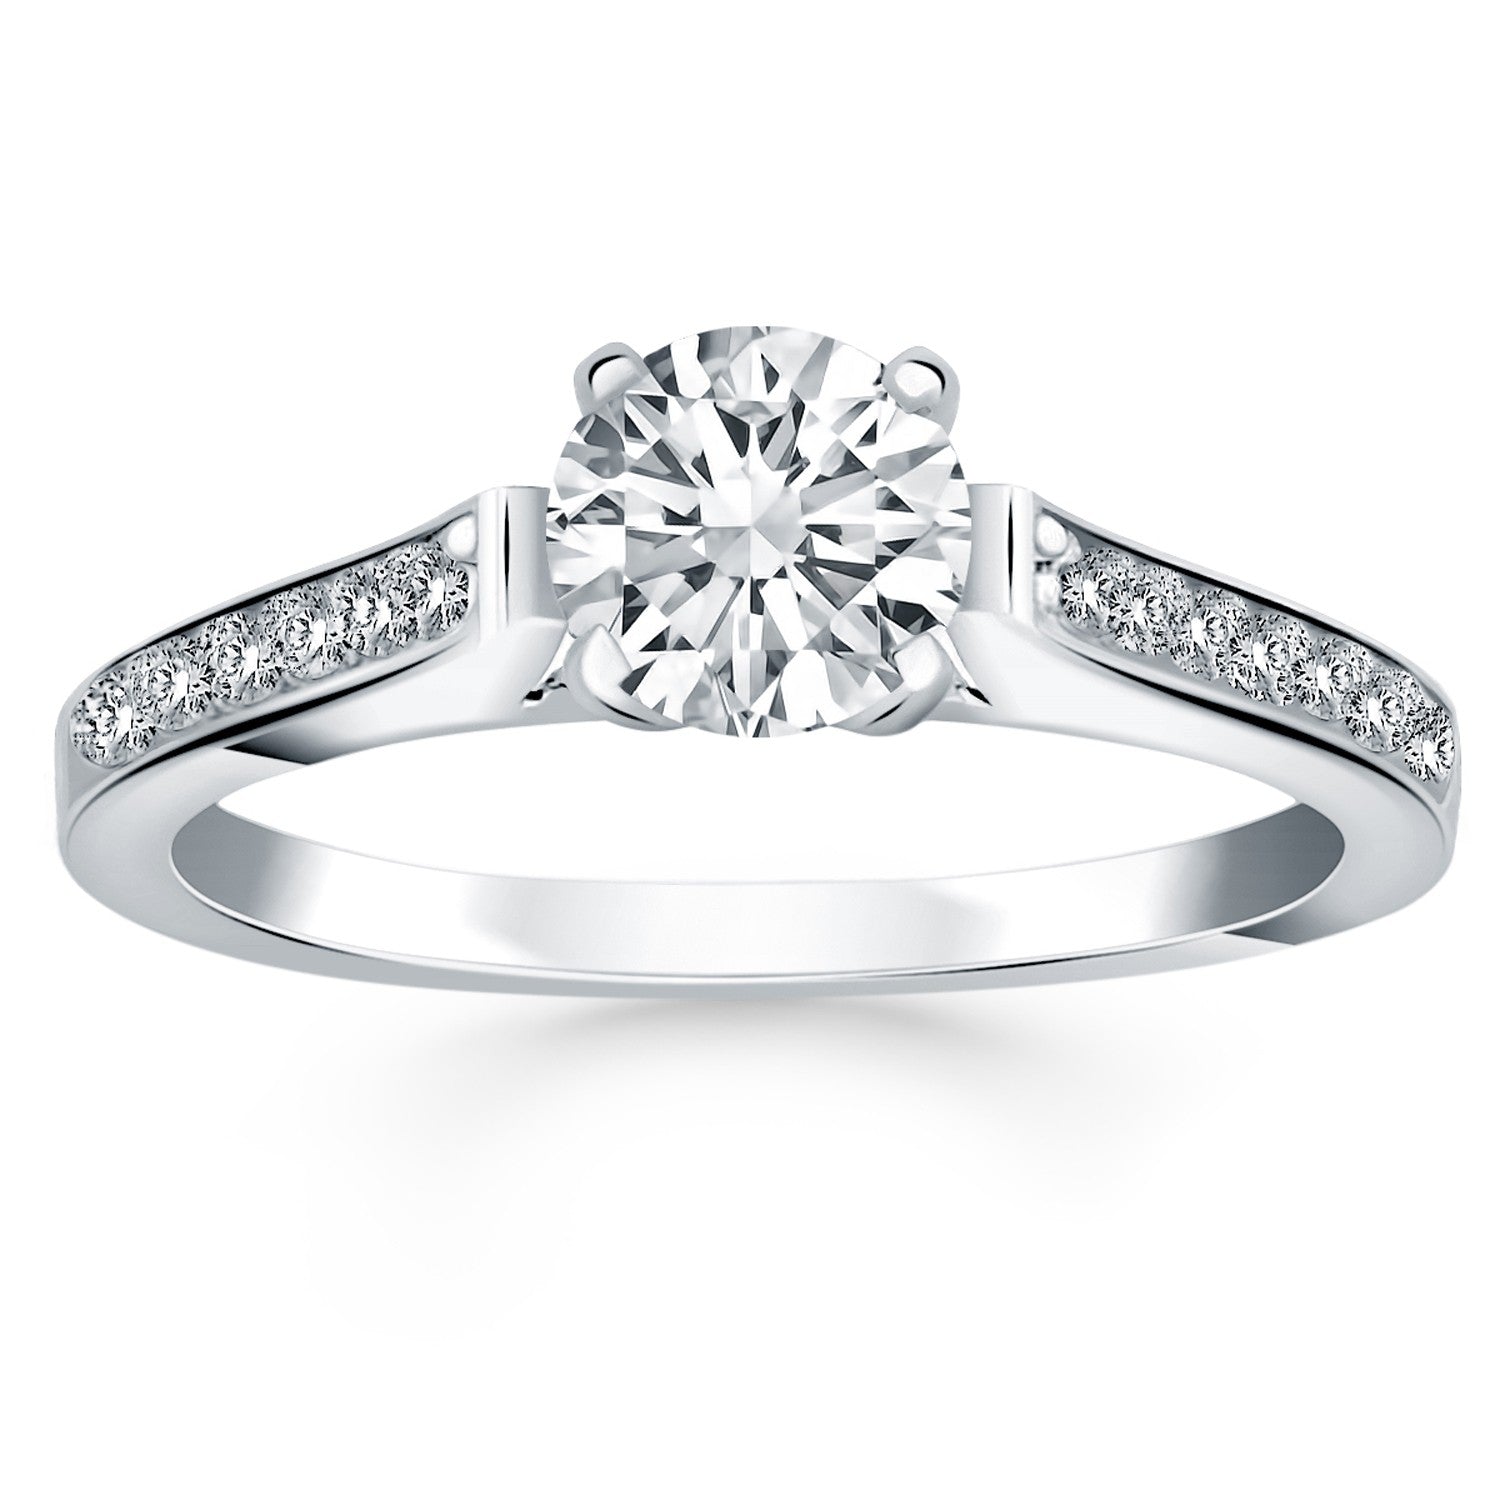 14k White Gold Pave Diamond Cathedral Engagement Ring